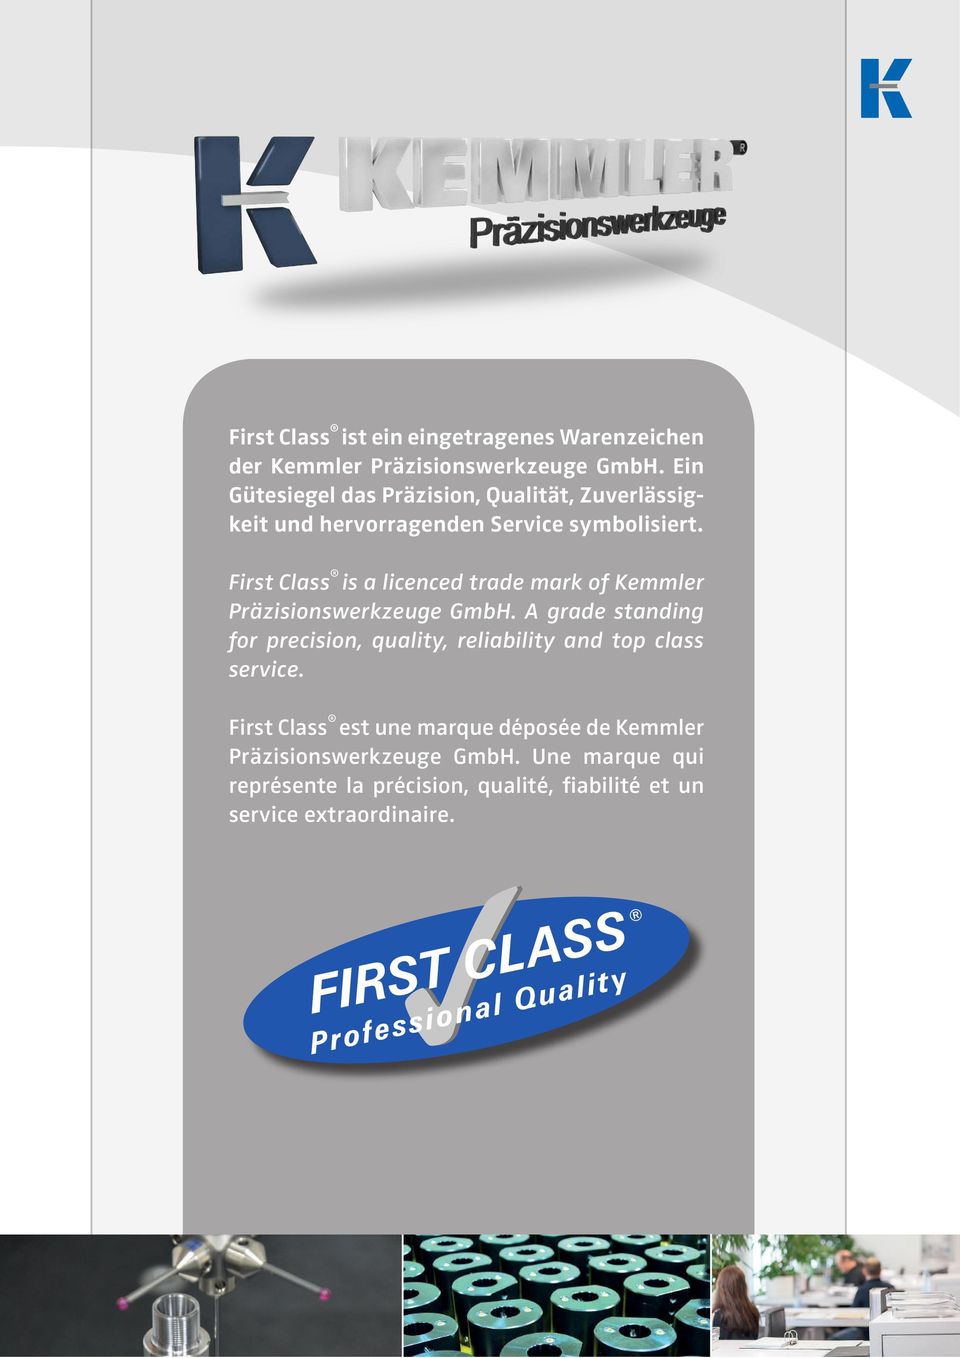 First Class is a licenced trade mark of Kemmler Präzisionswerkzeuge GmbH.